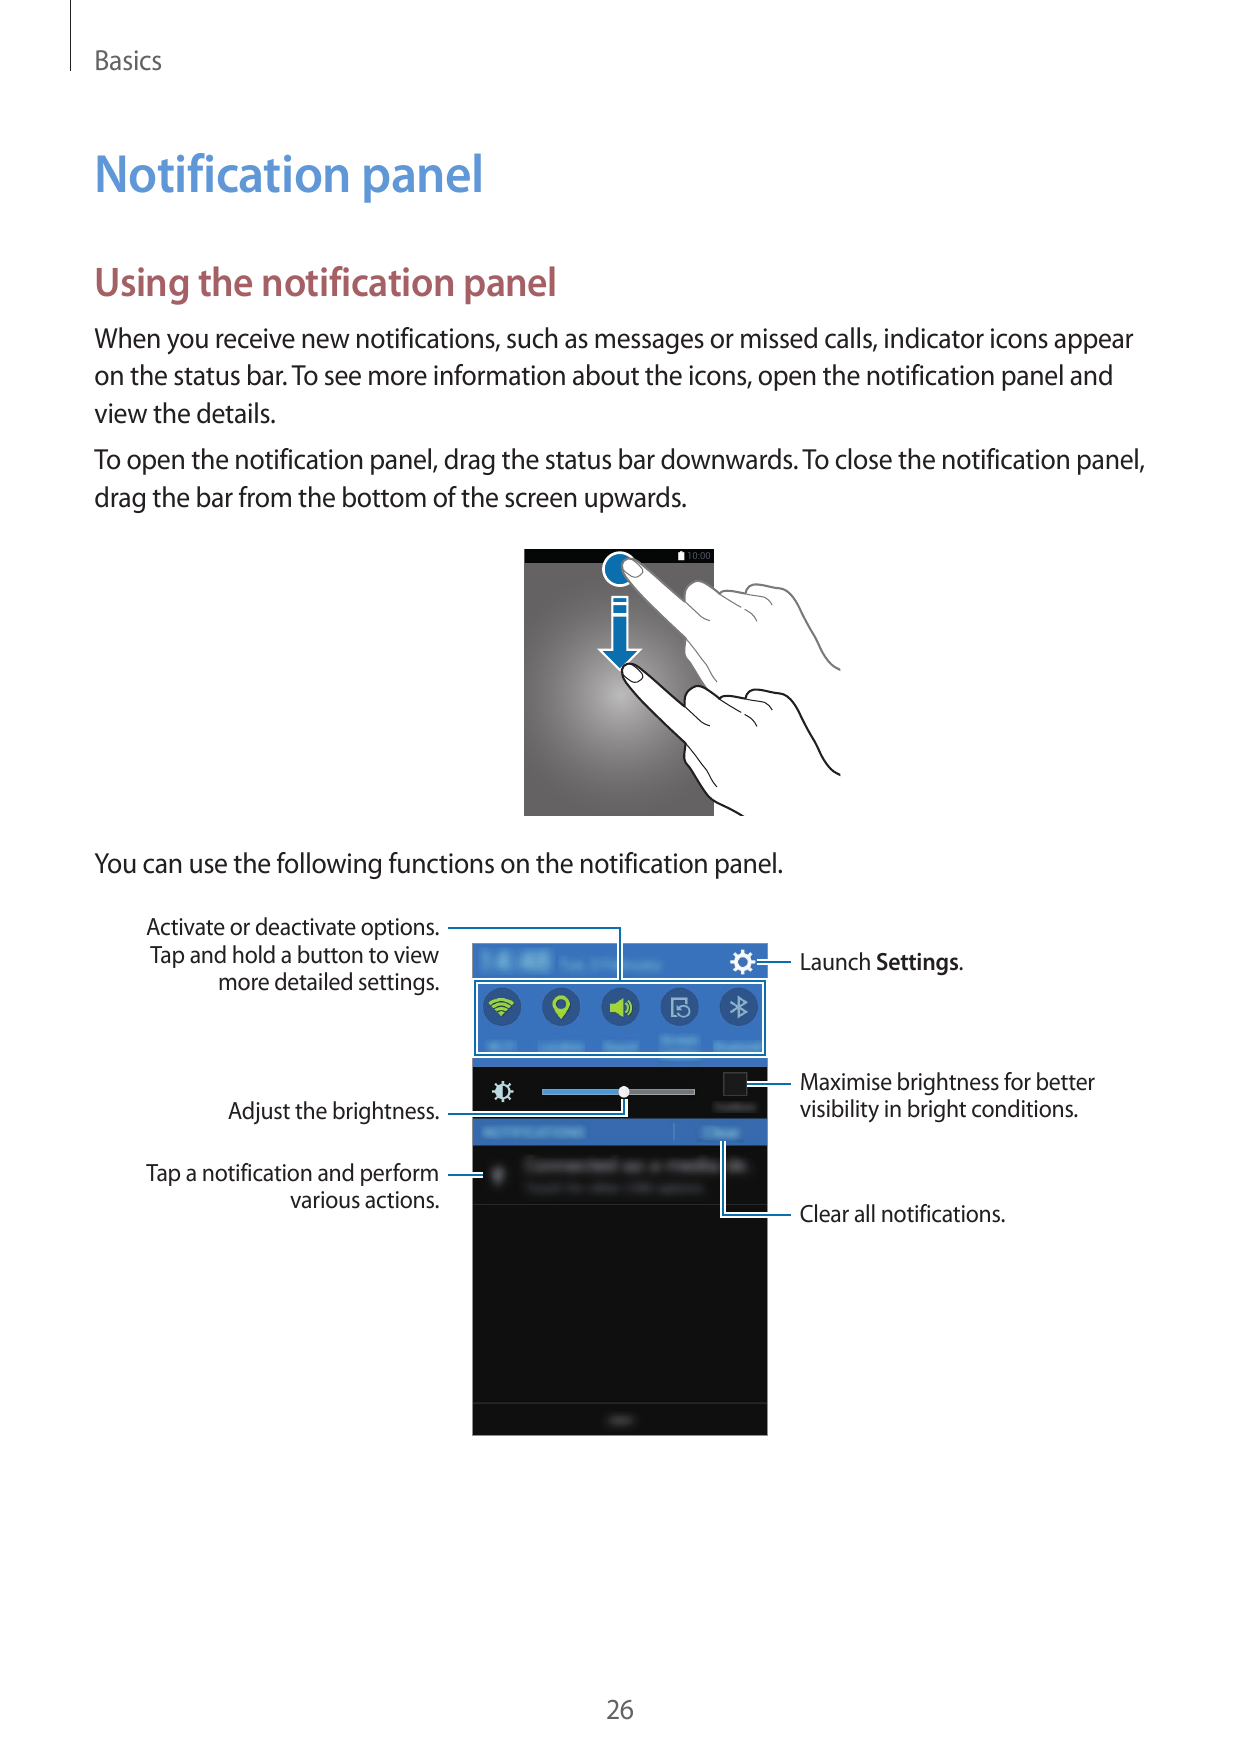 BasicsNotification panelUsing the notification panelWhen you receive new notifications, such as messages or missed calls, indica